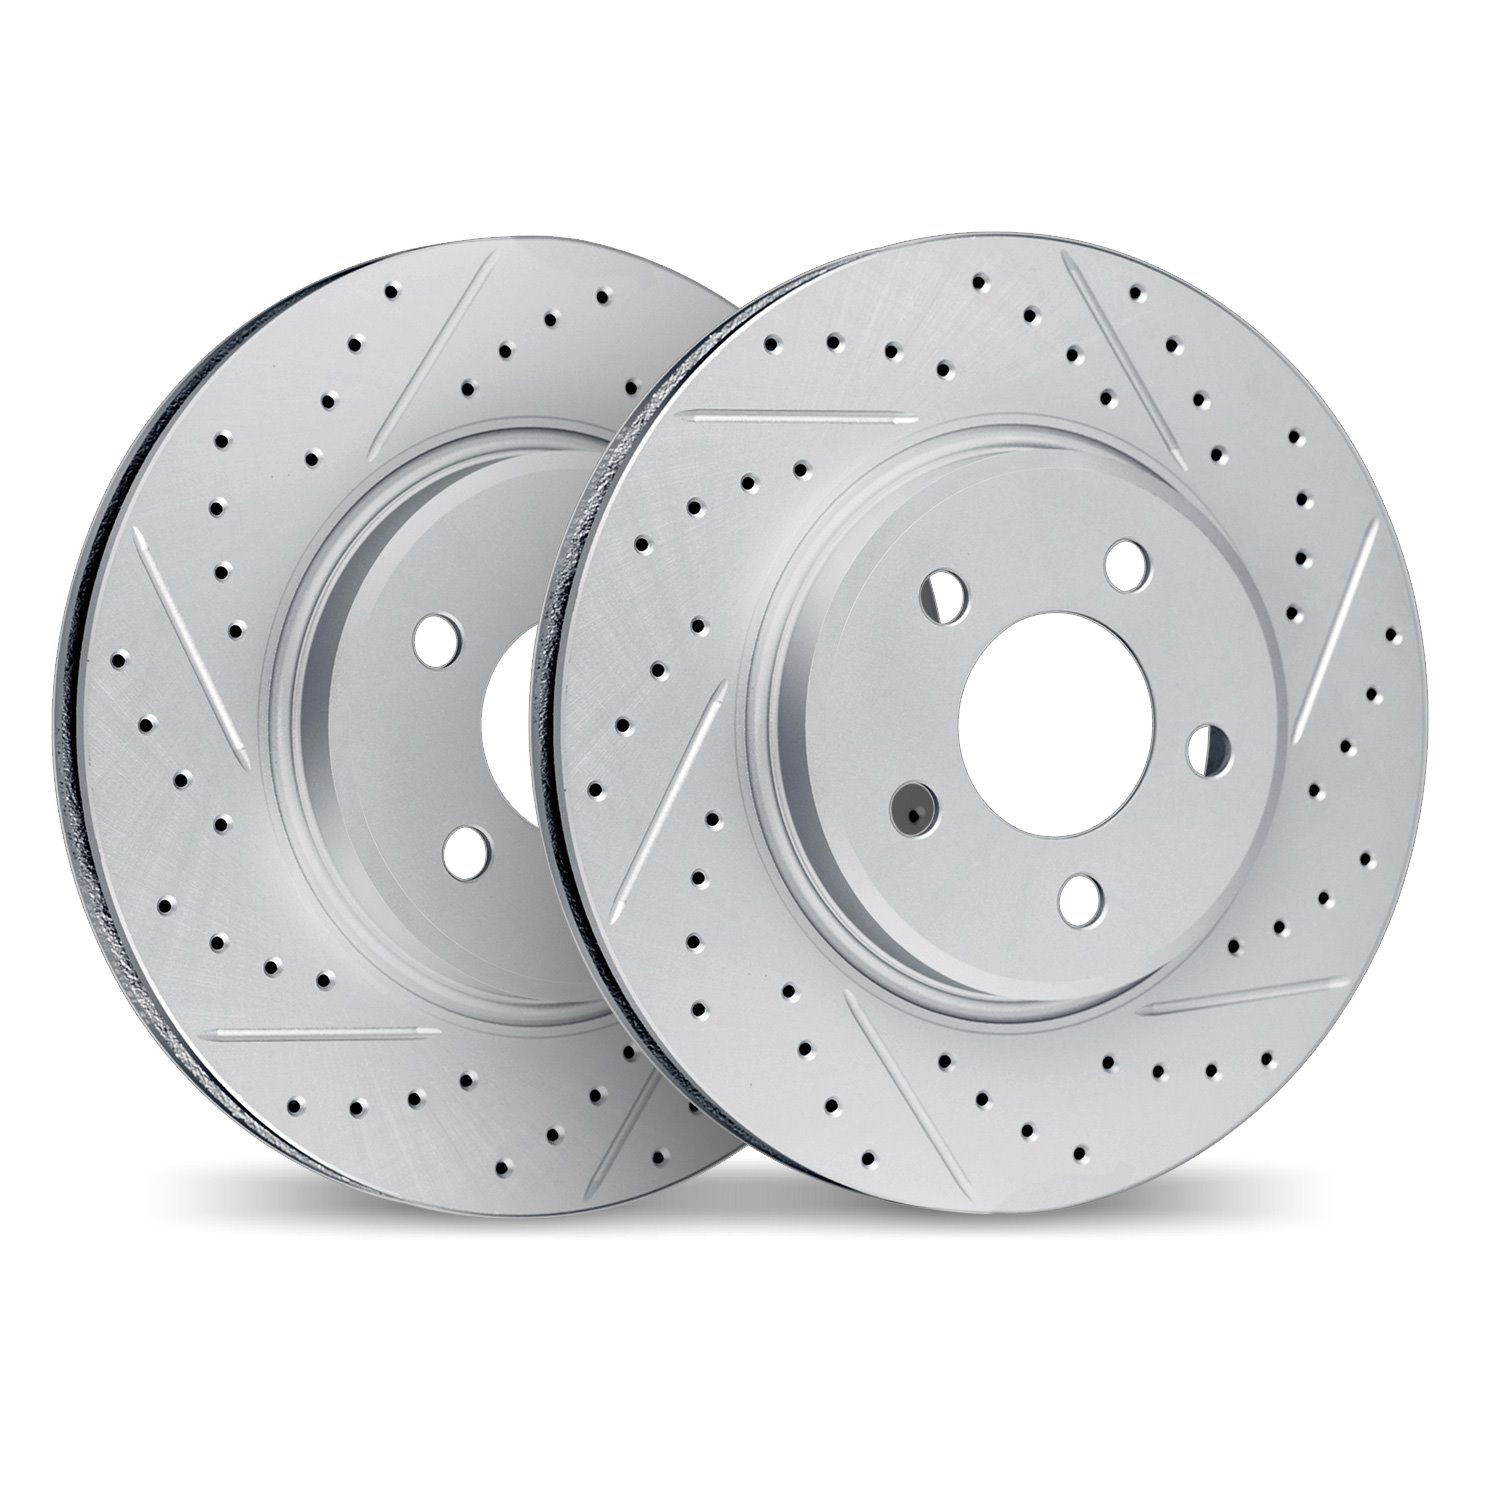 2002-31026 Geoperformance Drilled/Slotted Brake Rotors, 2010-2018 BMW, Position: Front